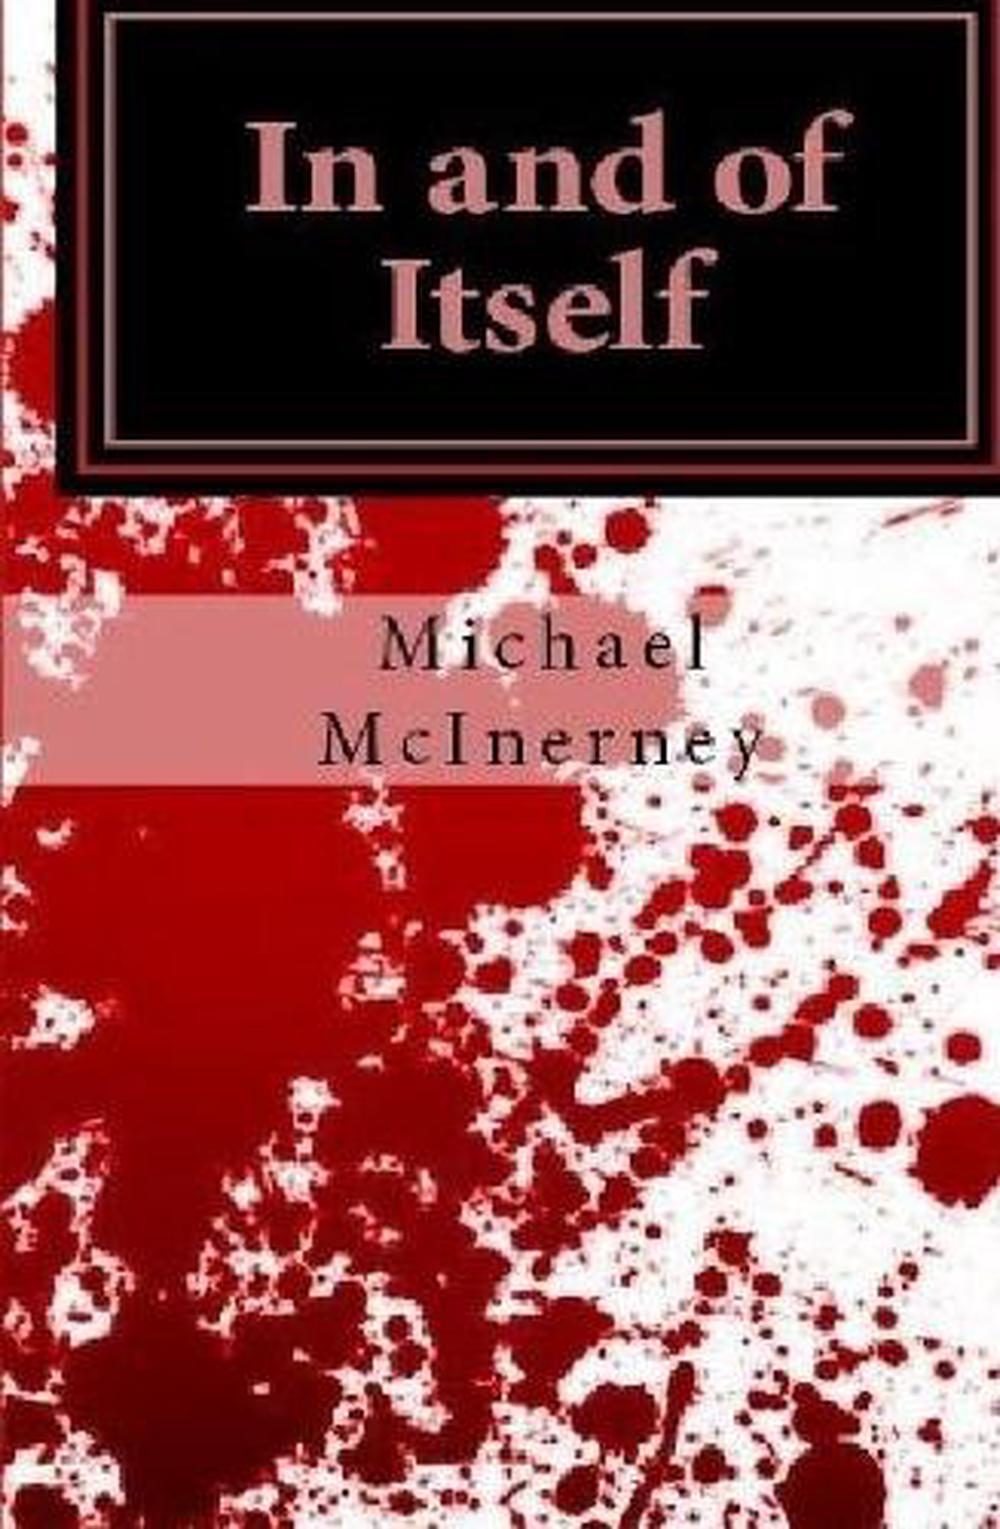 In and of Itself by Michael Mcinerney (English) Hardcover Book Free ...